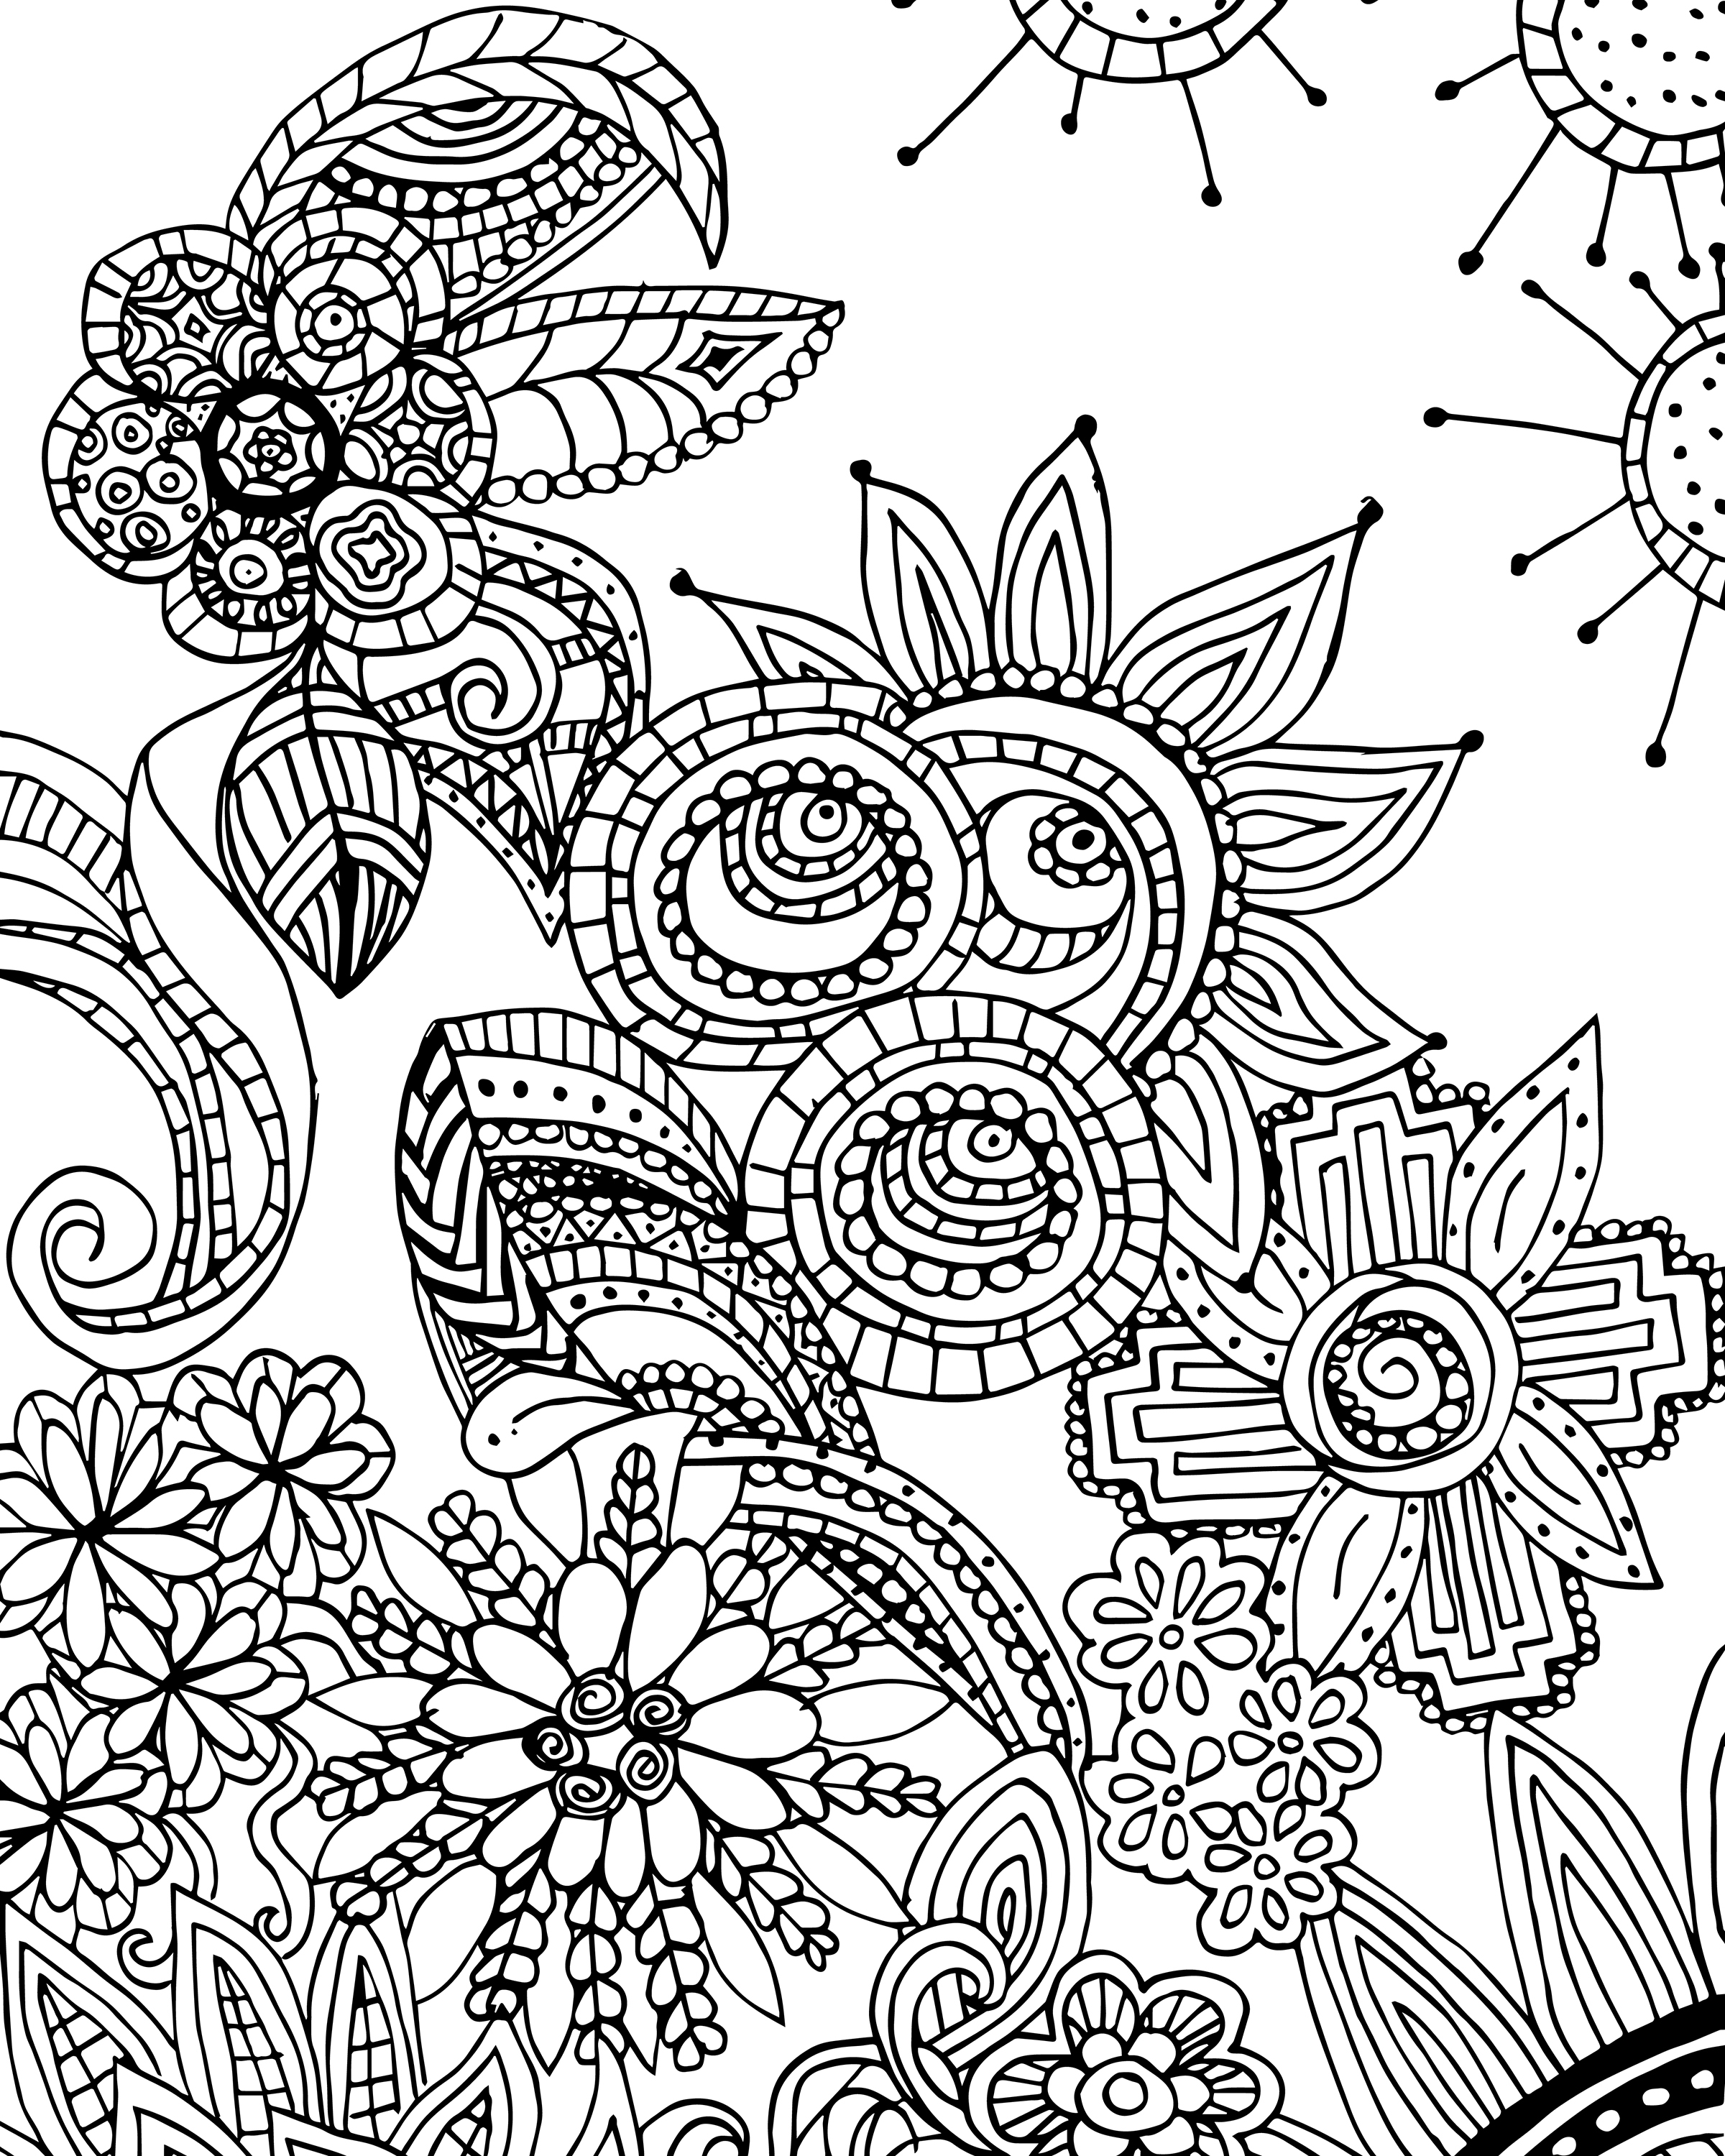 Zendoodle Coloring Pages at GetDrawings | Free download